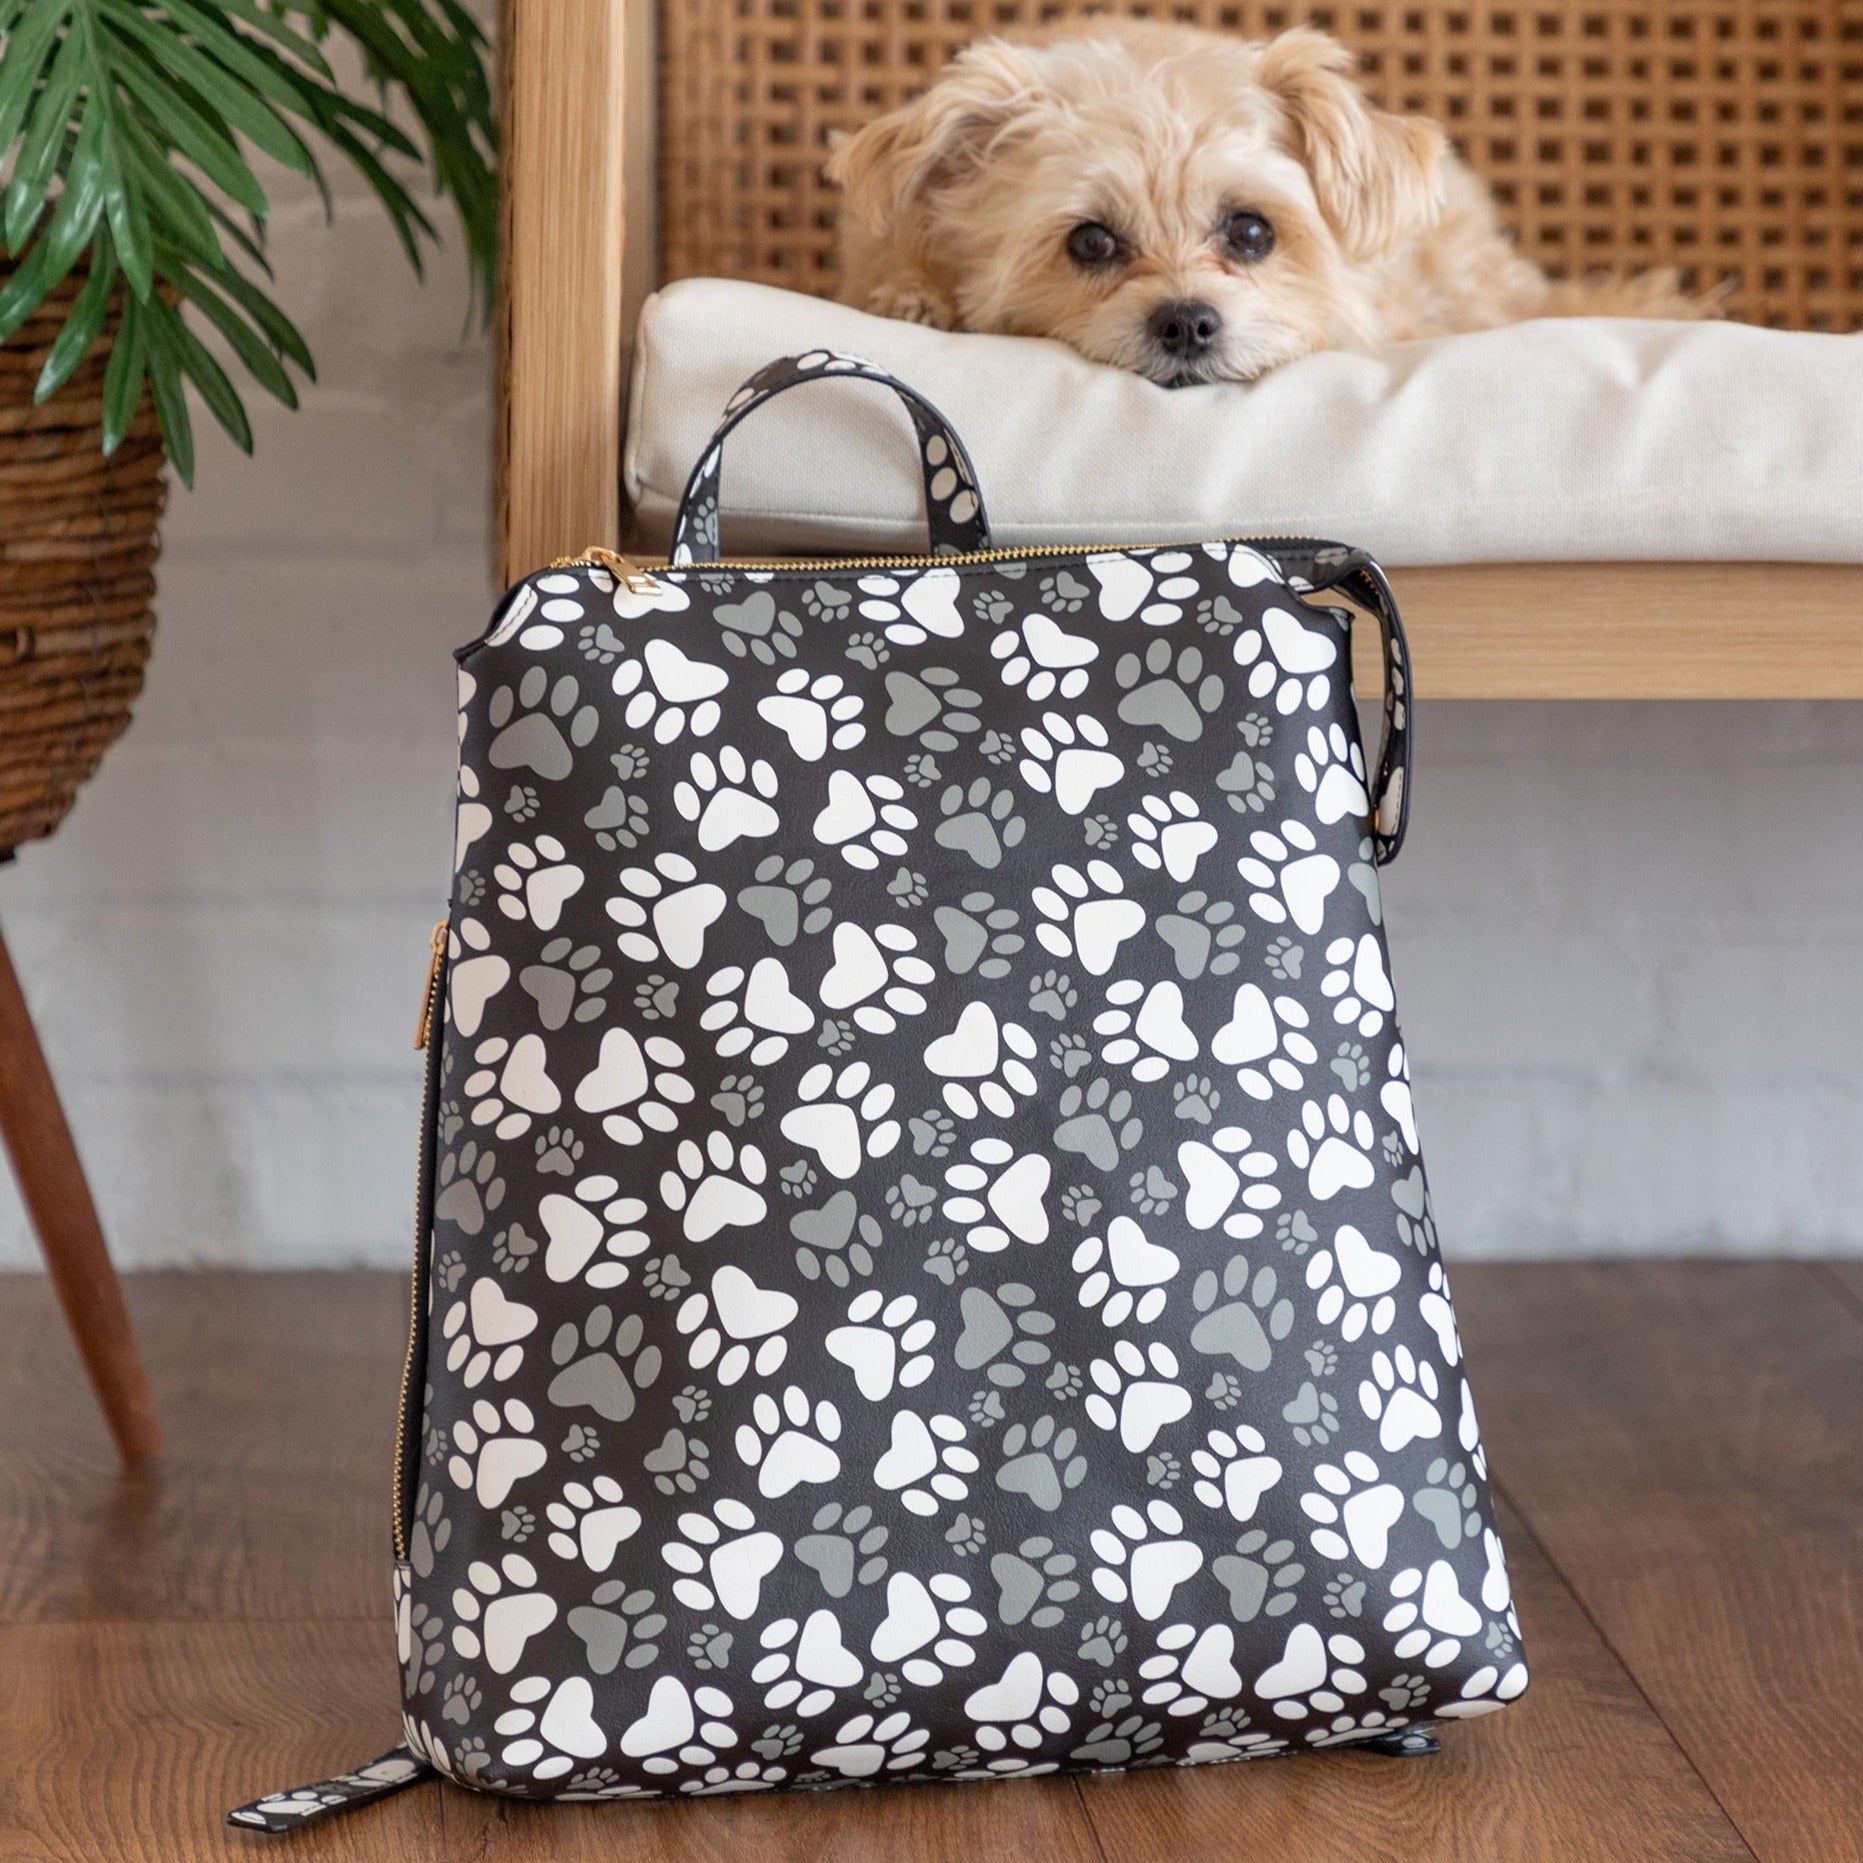 Paw Prints Galore Backpack - Paws & More Paws